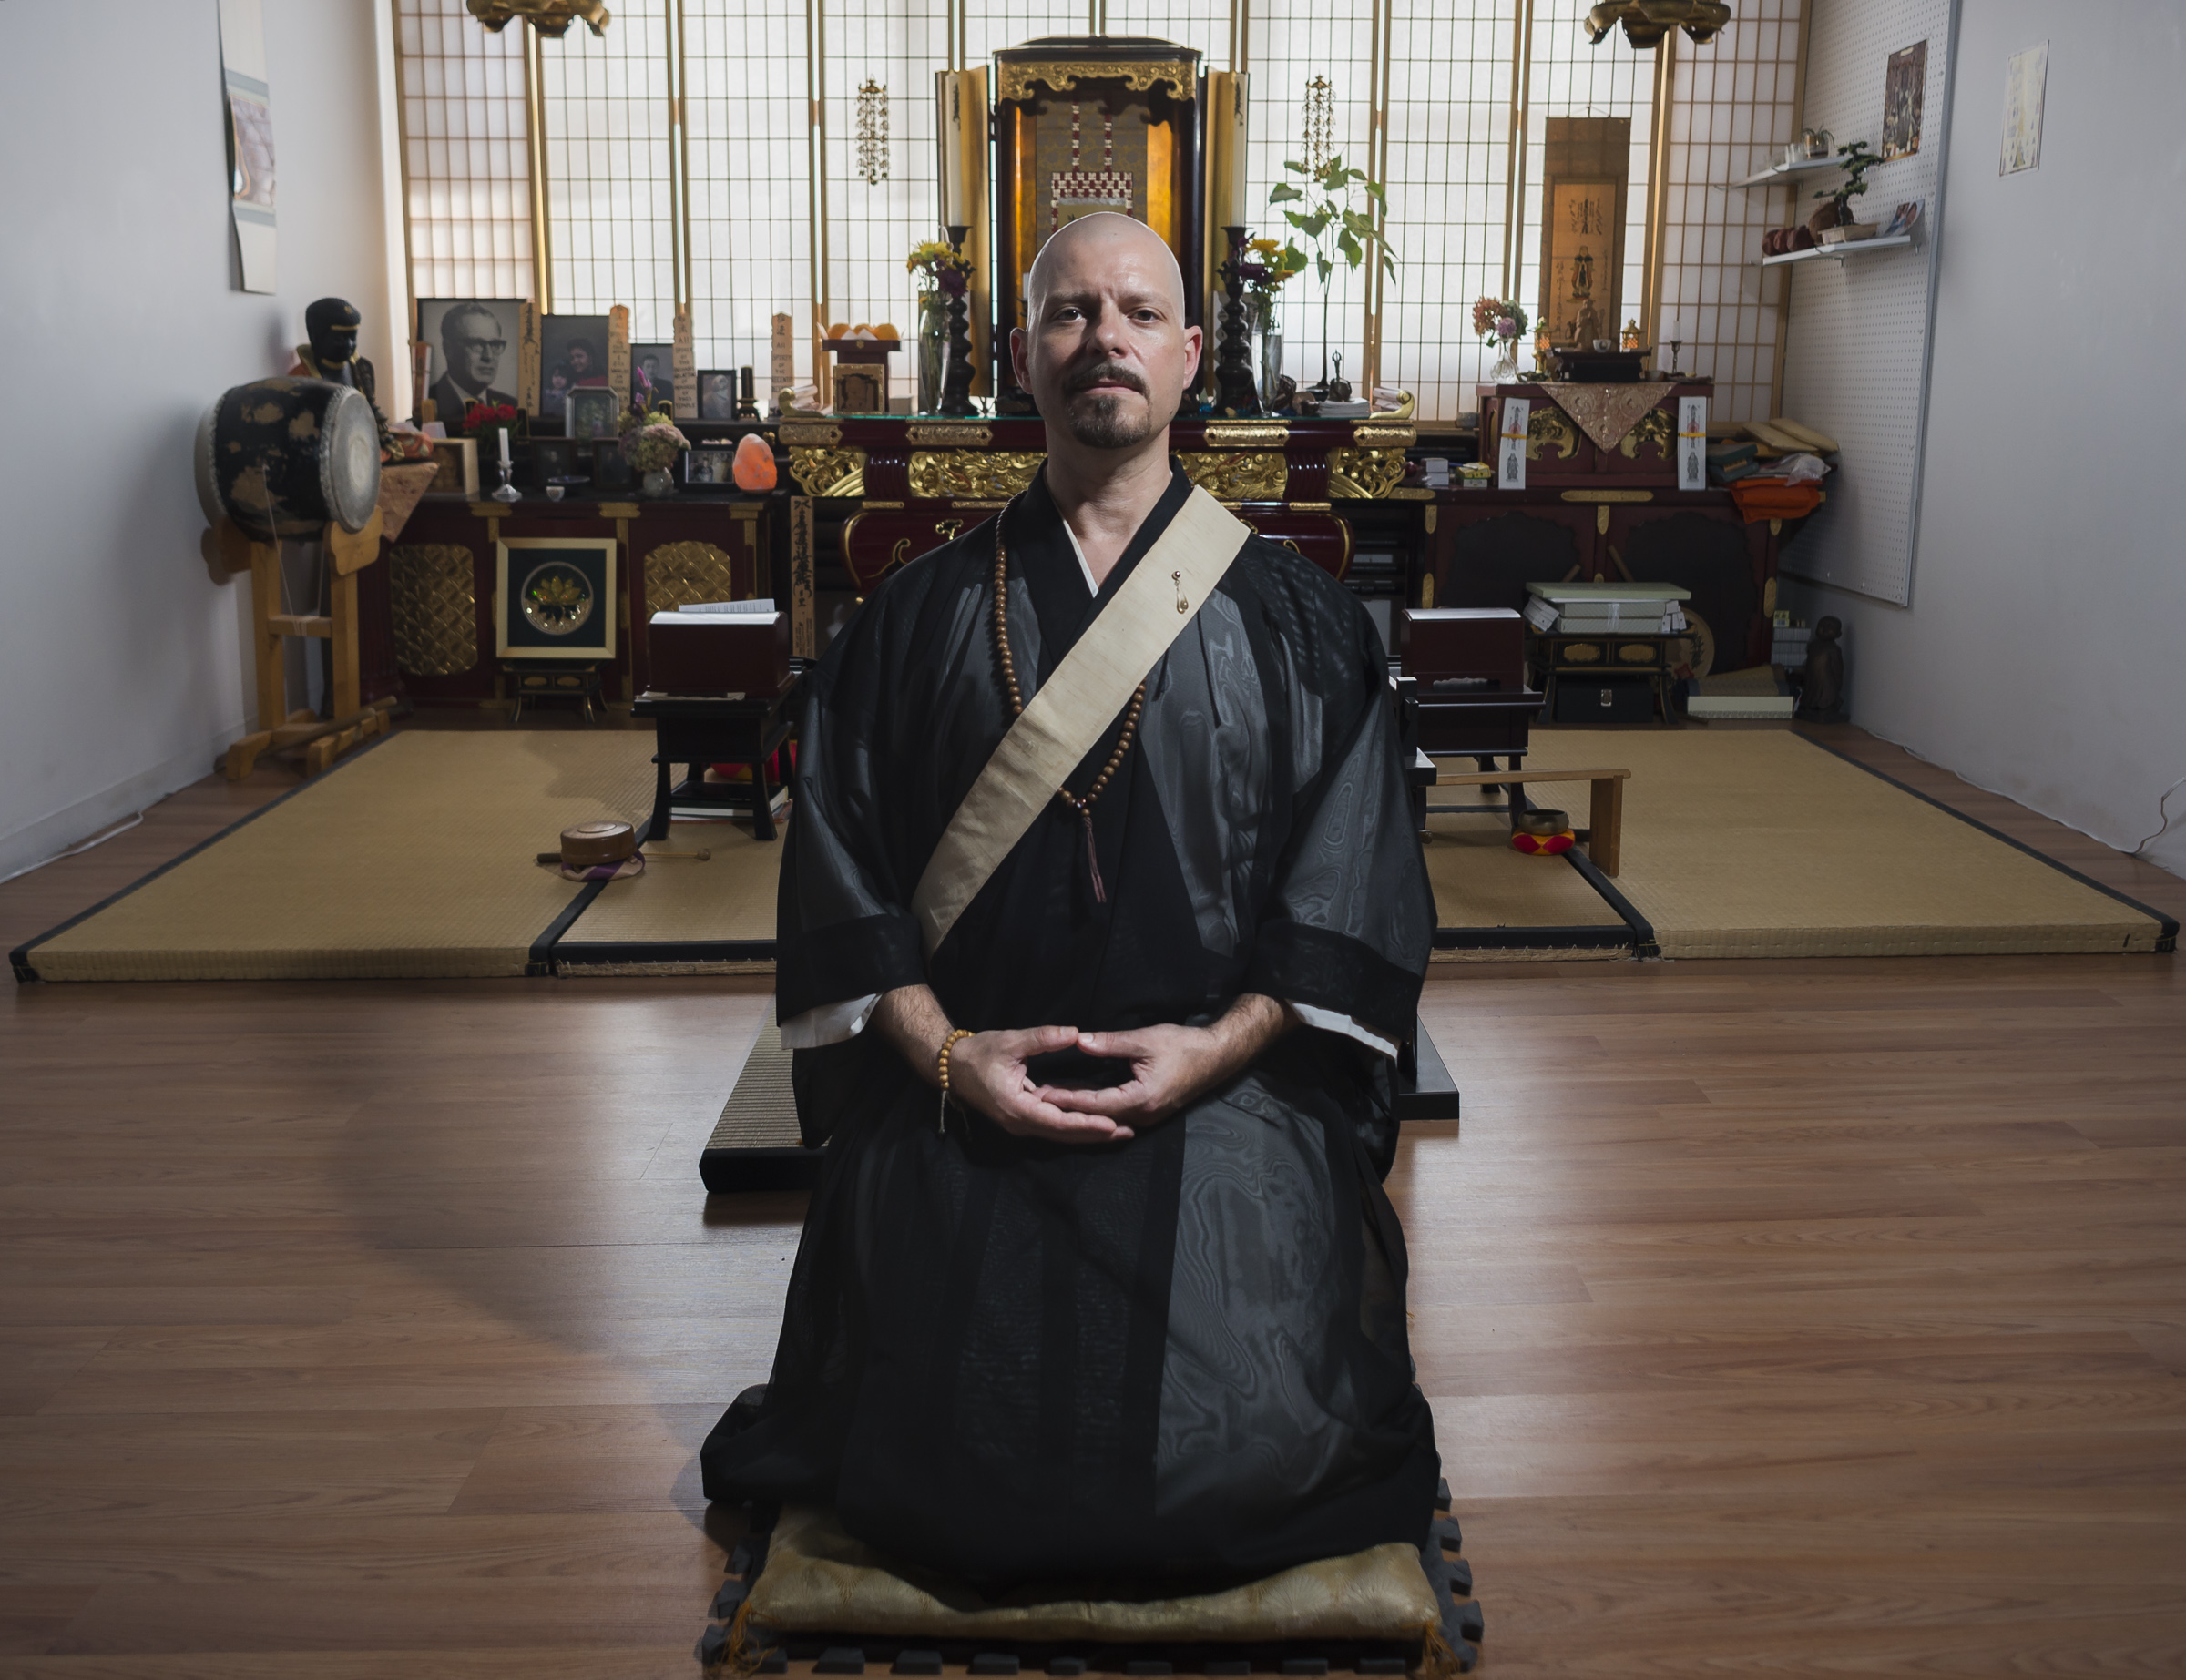 Cody Kroll, a Buddhist priest, poses for a portrait in the Enkyoji Buddhist Temple, located in the Hungerford building, in Rochester, N.Y., on Sept. 18, 2016. As a Buddhist priest, Kroll assumes the name and tittle Shami Kanyu Kroll while leading services, and teaching the dharma at the Enkyoji Buddhist Temple. During the day Kroll also works as a high school photography teacher.